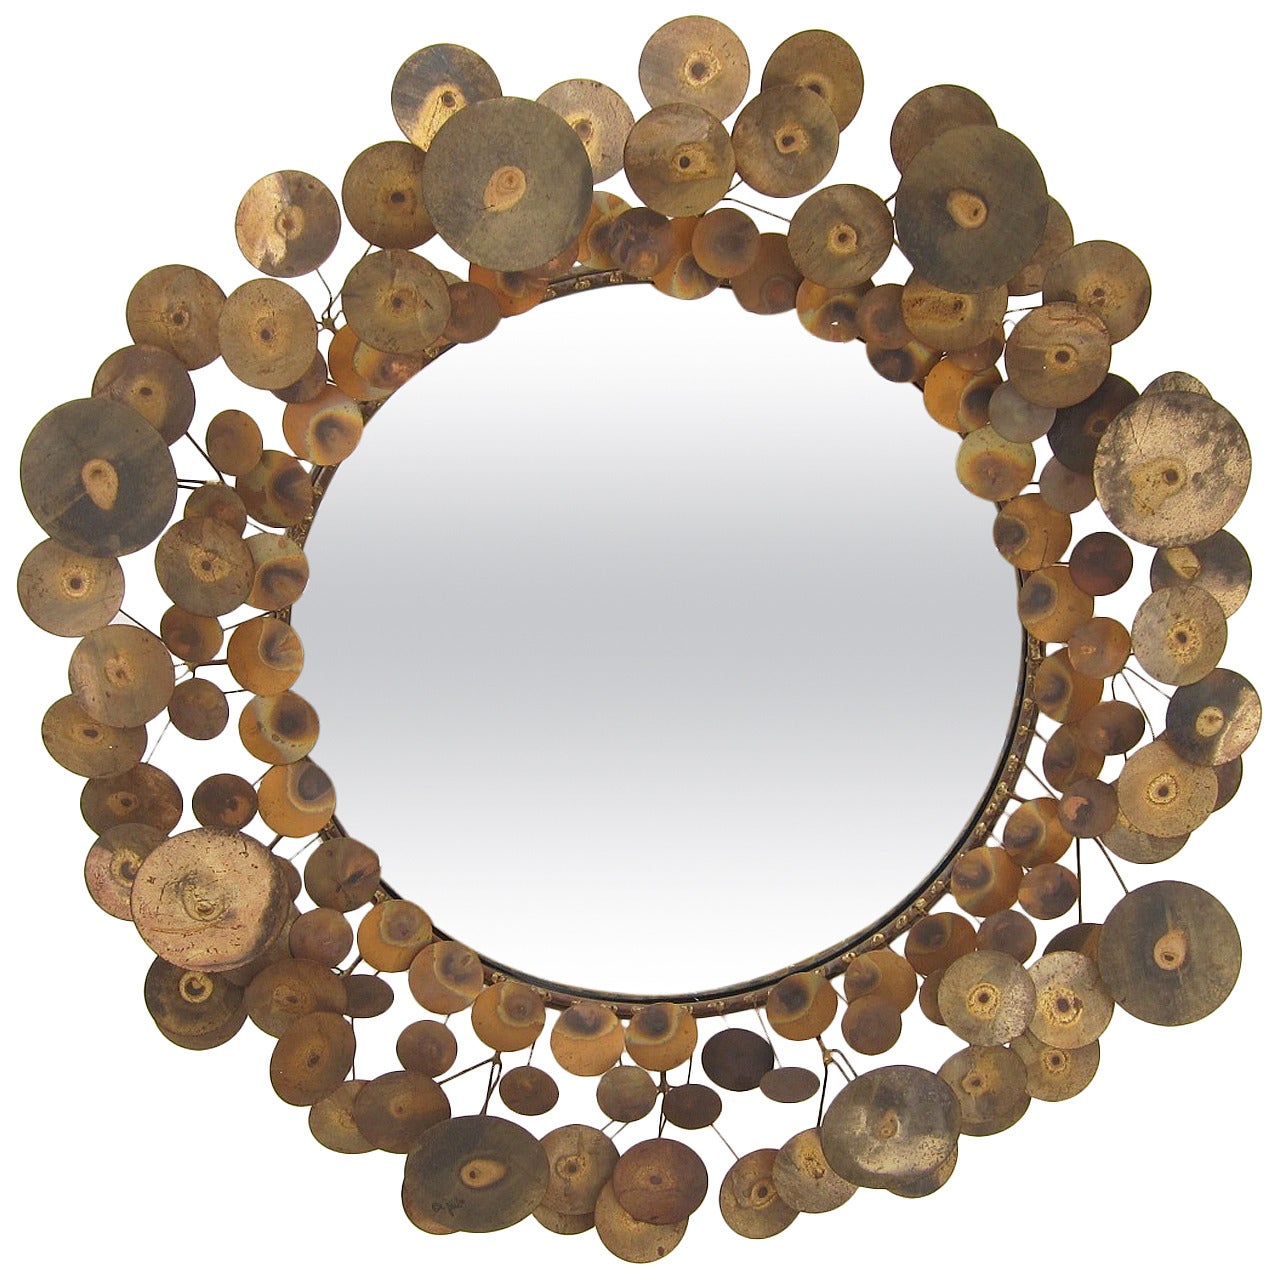 Curtis Jere "Raindrops" Mirror in Brass and Copper For Sale